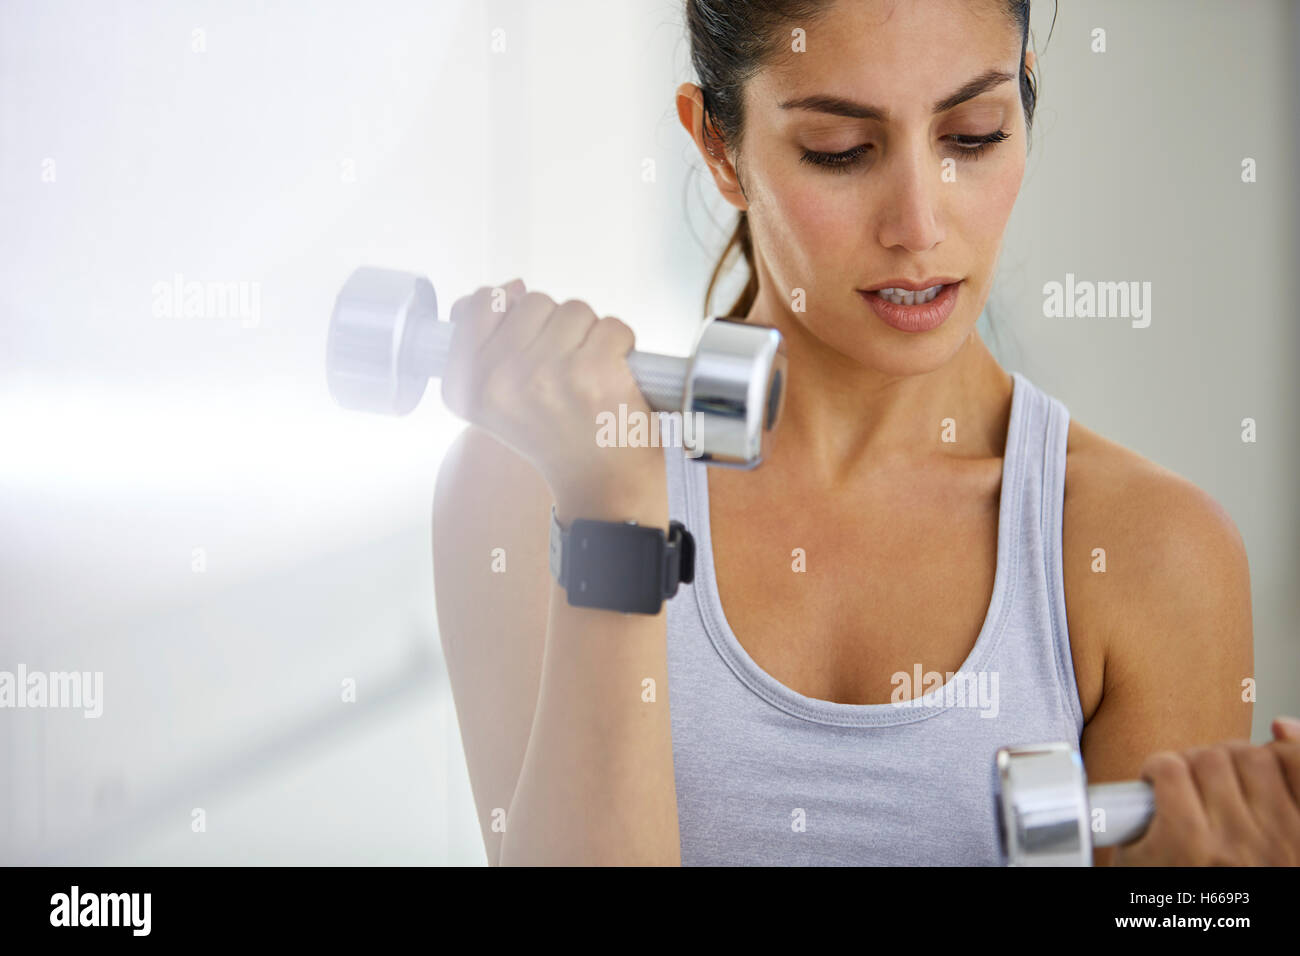 Young Woman Exercising Biceps With Dumbbells In The Gym And Flexing Muscles  - Muscular Athletic Bodybuilder Fitness Model Doing Dumbbell Concentration  Curls Stock Photo, Picture and Royalty Free Image. Image 81263216.